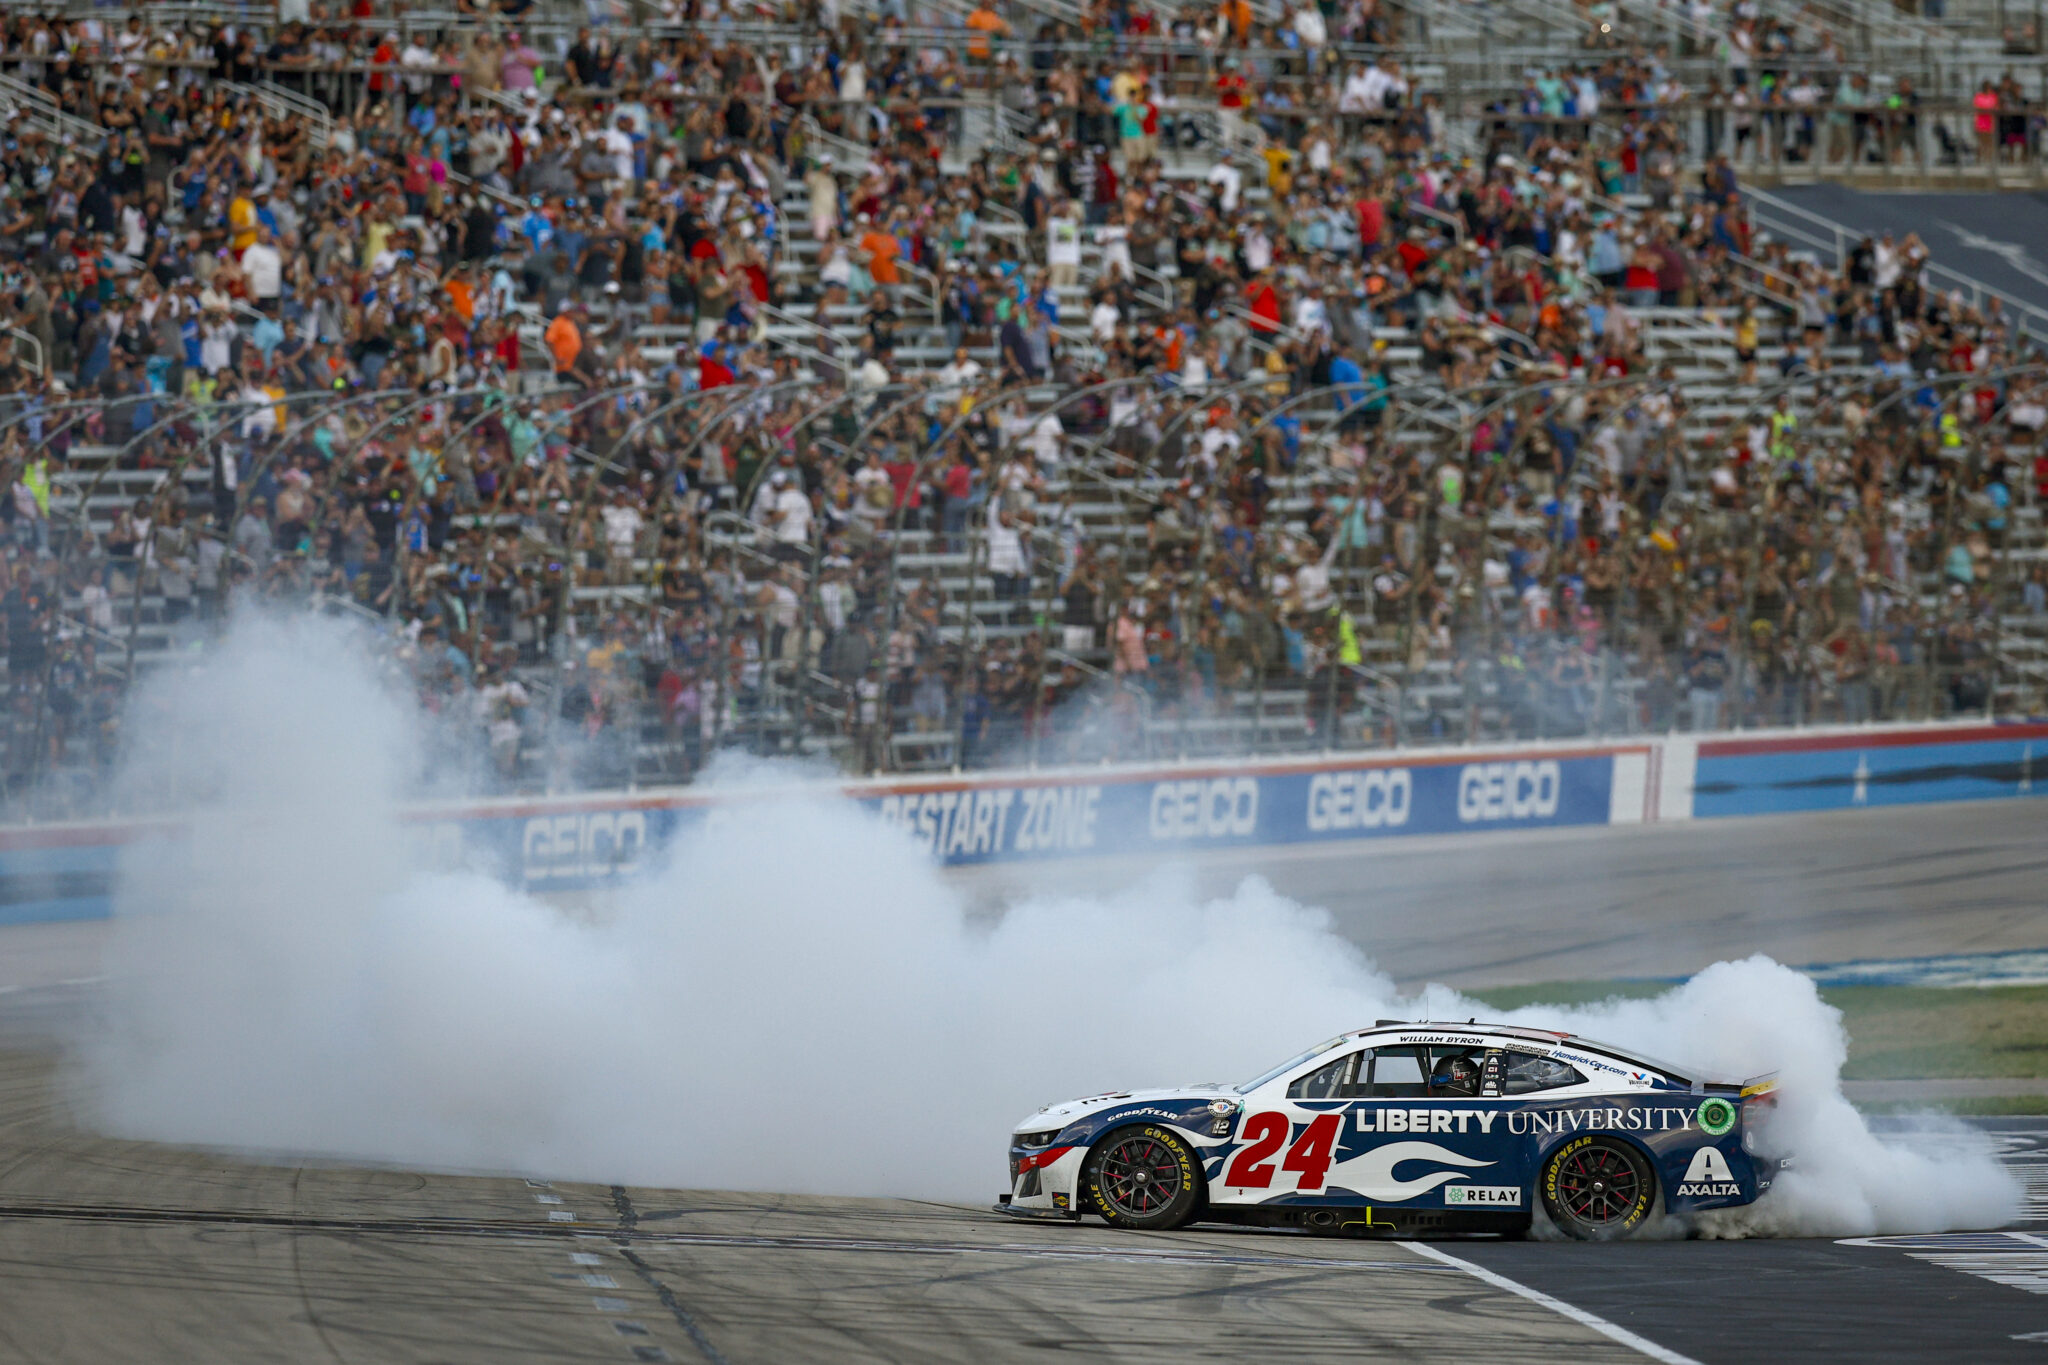 FORT WORTH, TEXAS - SEPTEMBER 24: William Byron, driver of the #24 Liberty University Chevrolet, celebrates with a burnout after winning the NASCAR Cup Series Autotrader EchoPark Automotive 400 at Texas Motor Speedway on September 24, 2023 in Fort Worth, Texas.